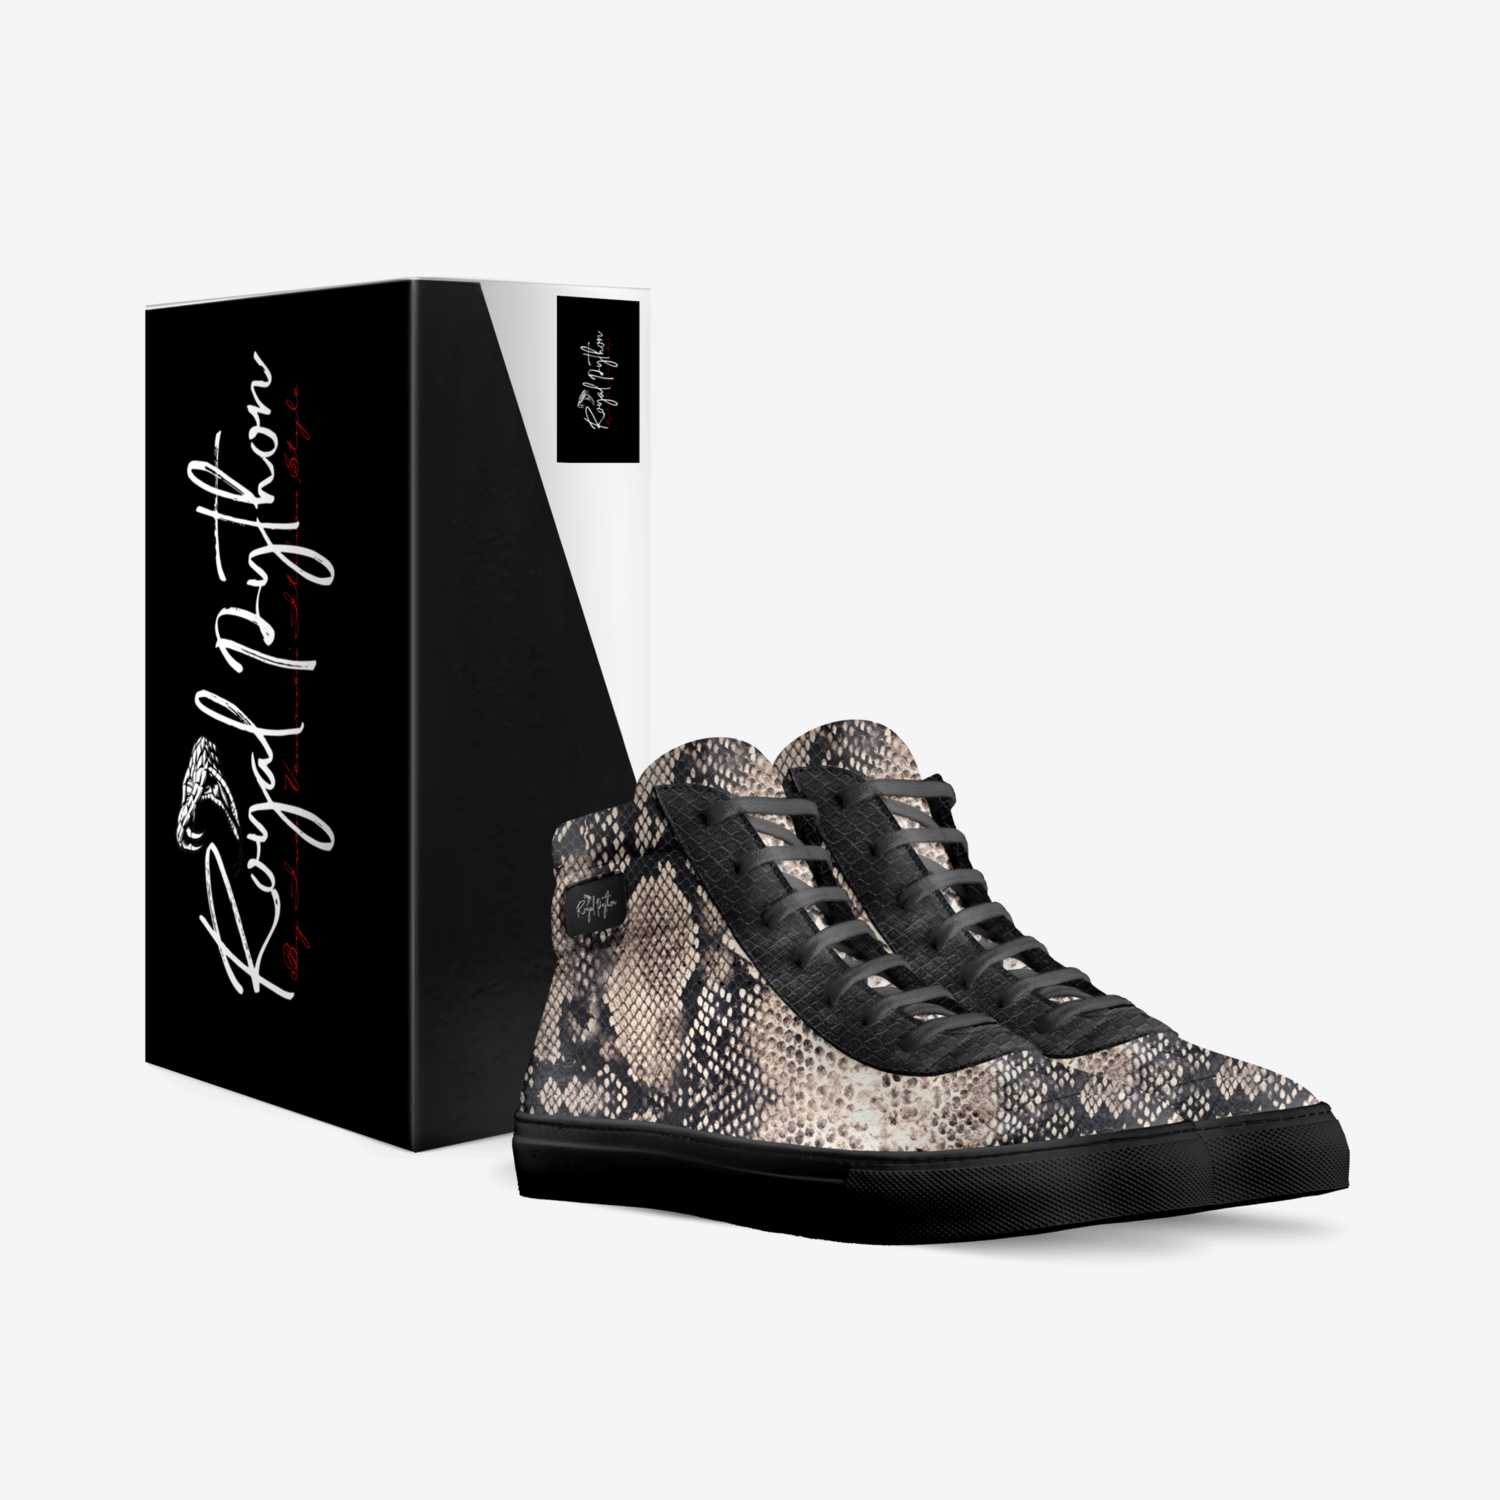 Royal Python custom made in Italy shoes by Ivan Venerucci | Box view